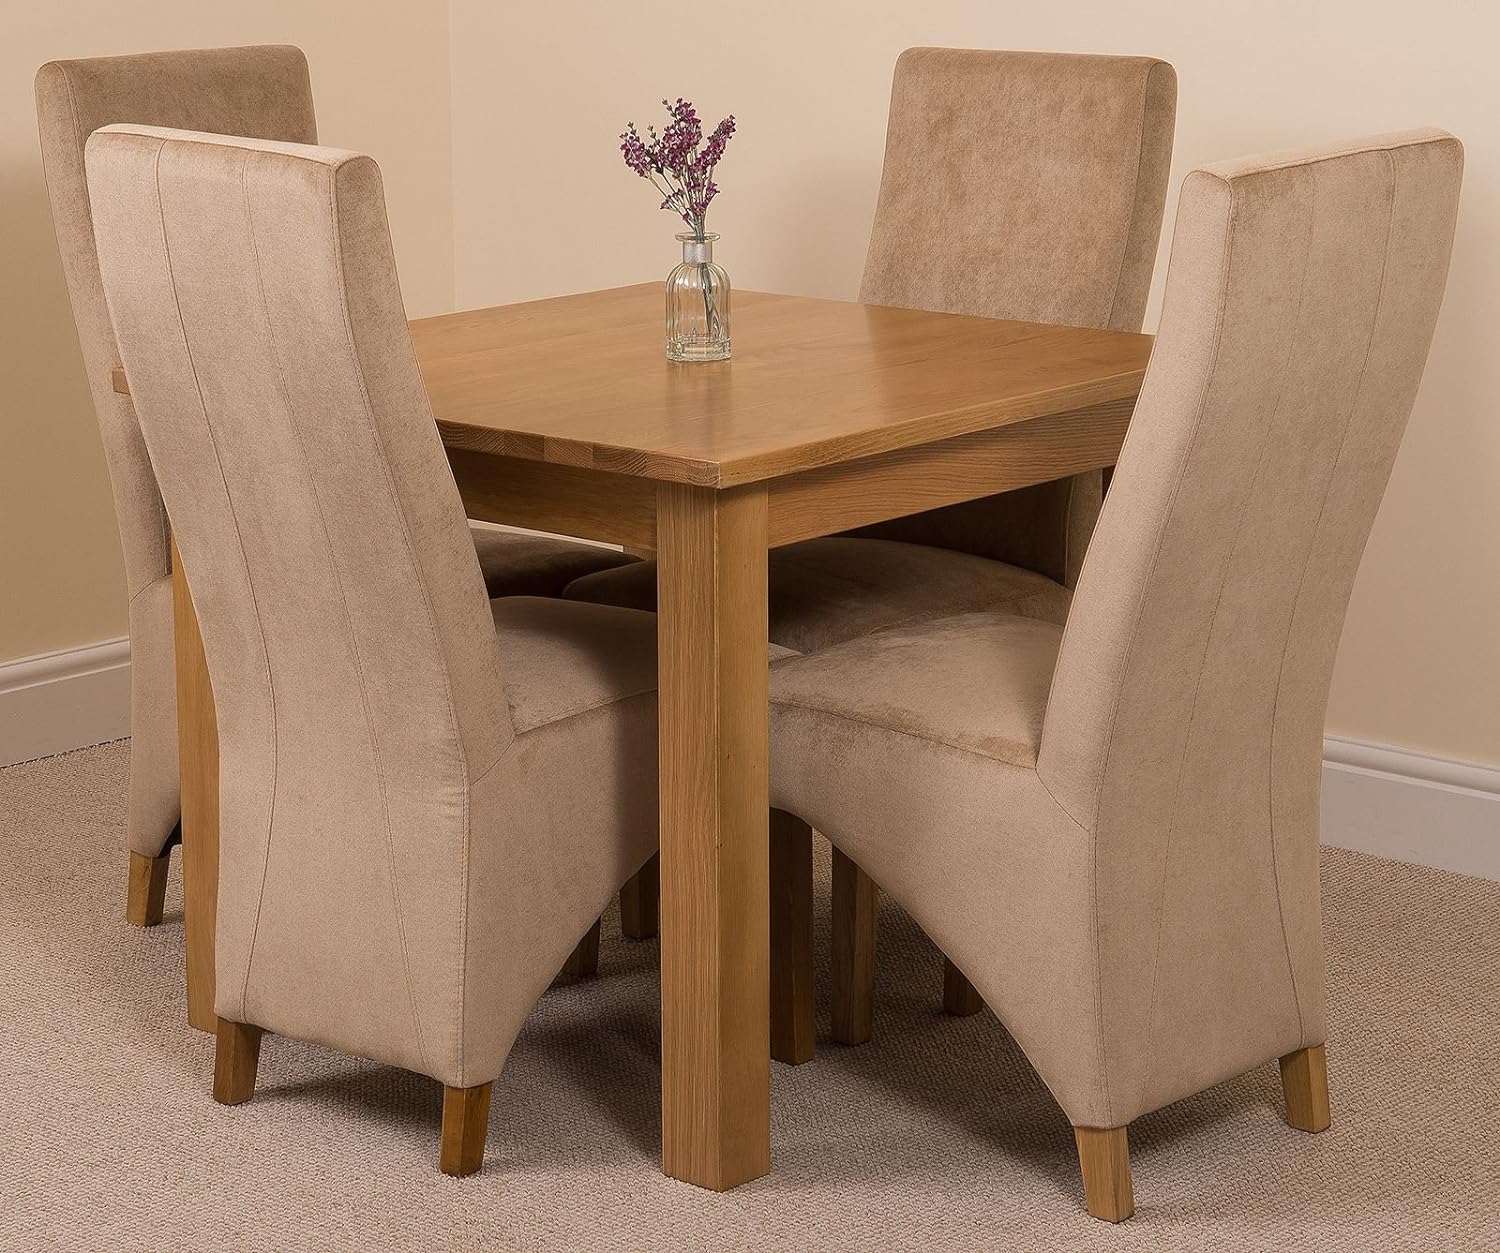 A dining table set for two with an empty chair.